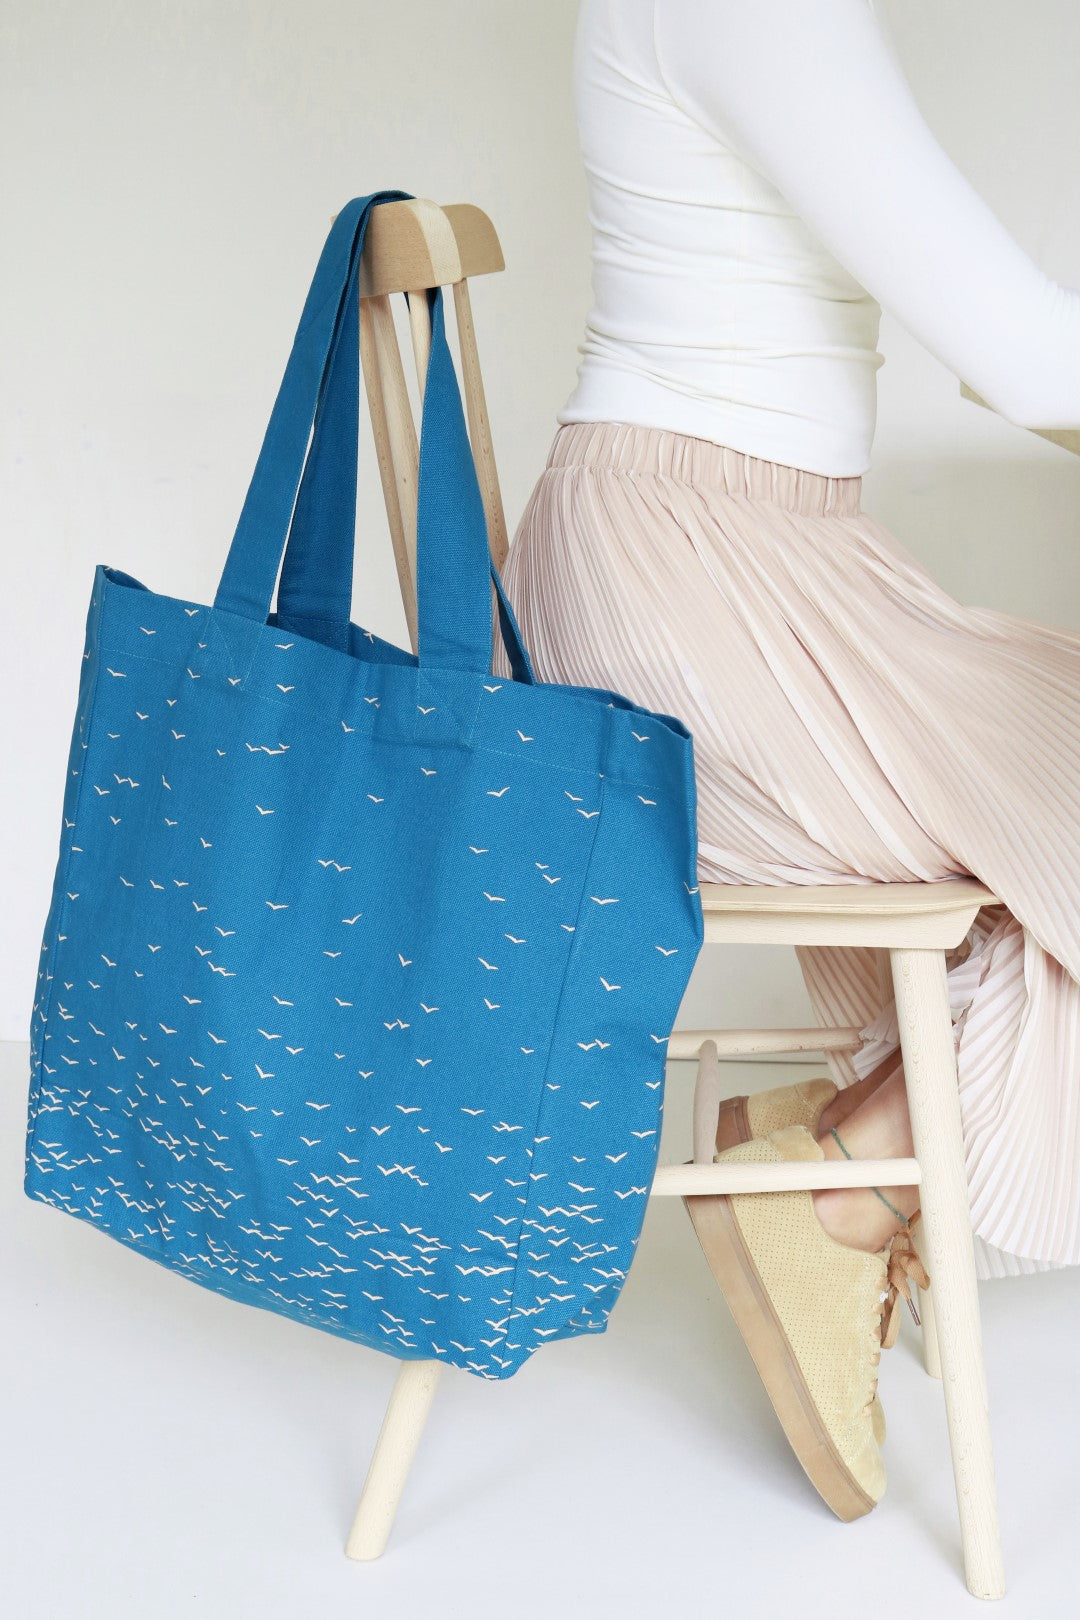 jurianne matter eco friendly blue cotton tote hanging on chair